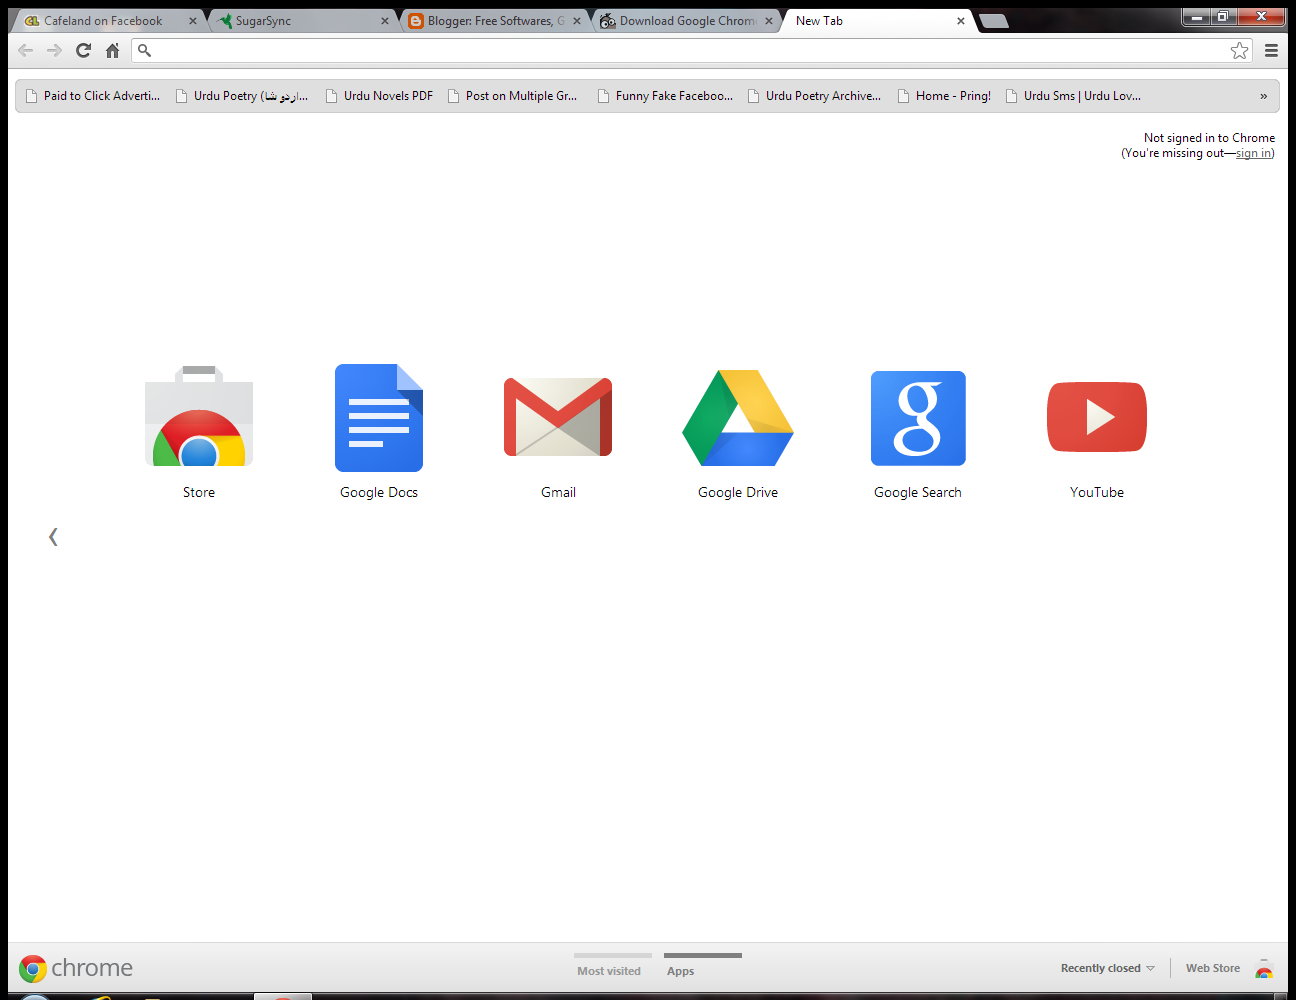 Download Google Chrome Browser Free